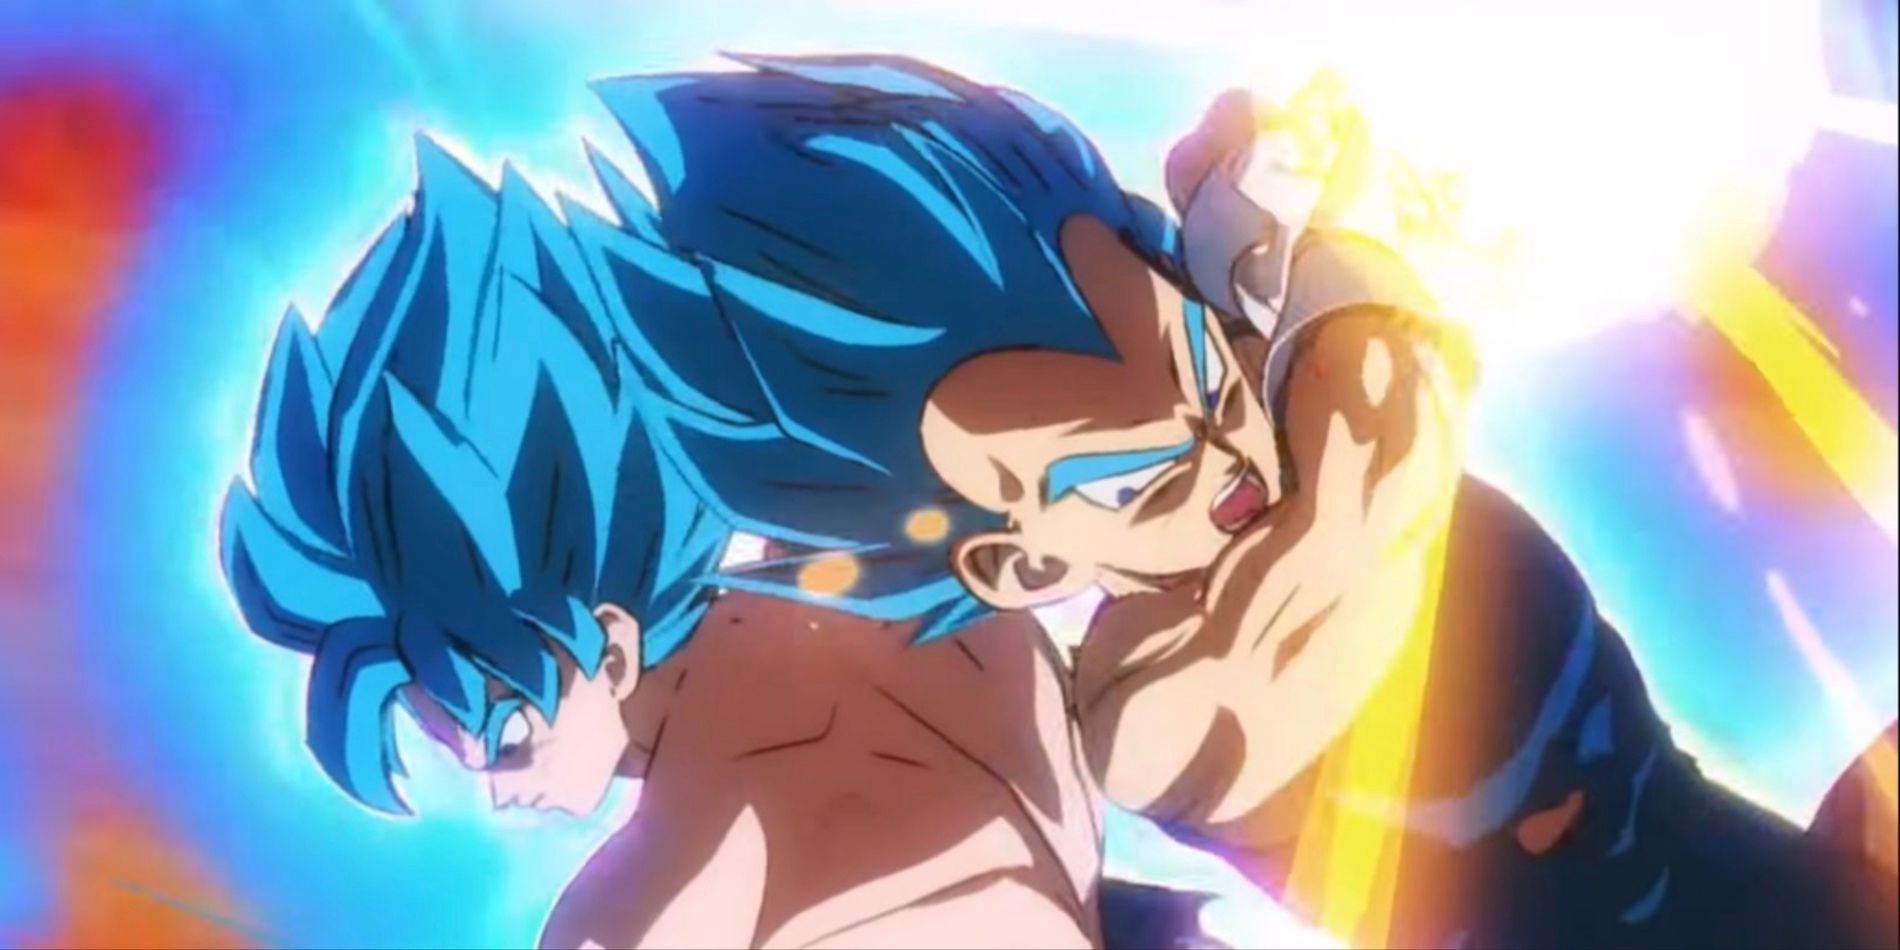 Super Saiyan Blue Goku and Vegeta power up attack against Broly in Dragon Ball Super: Broly.